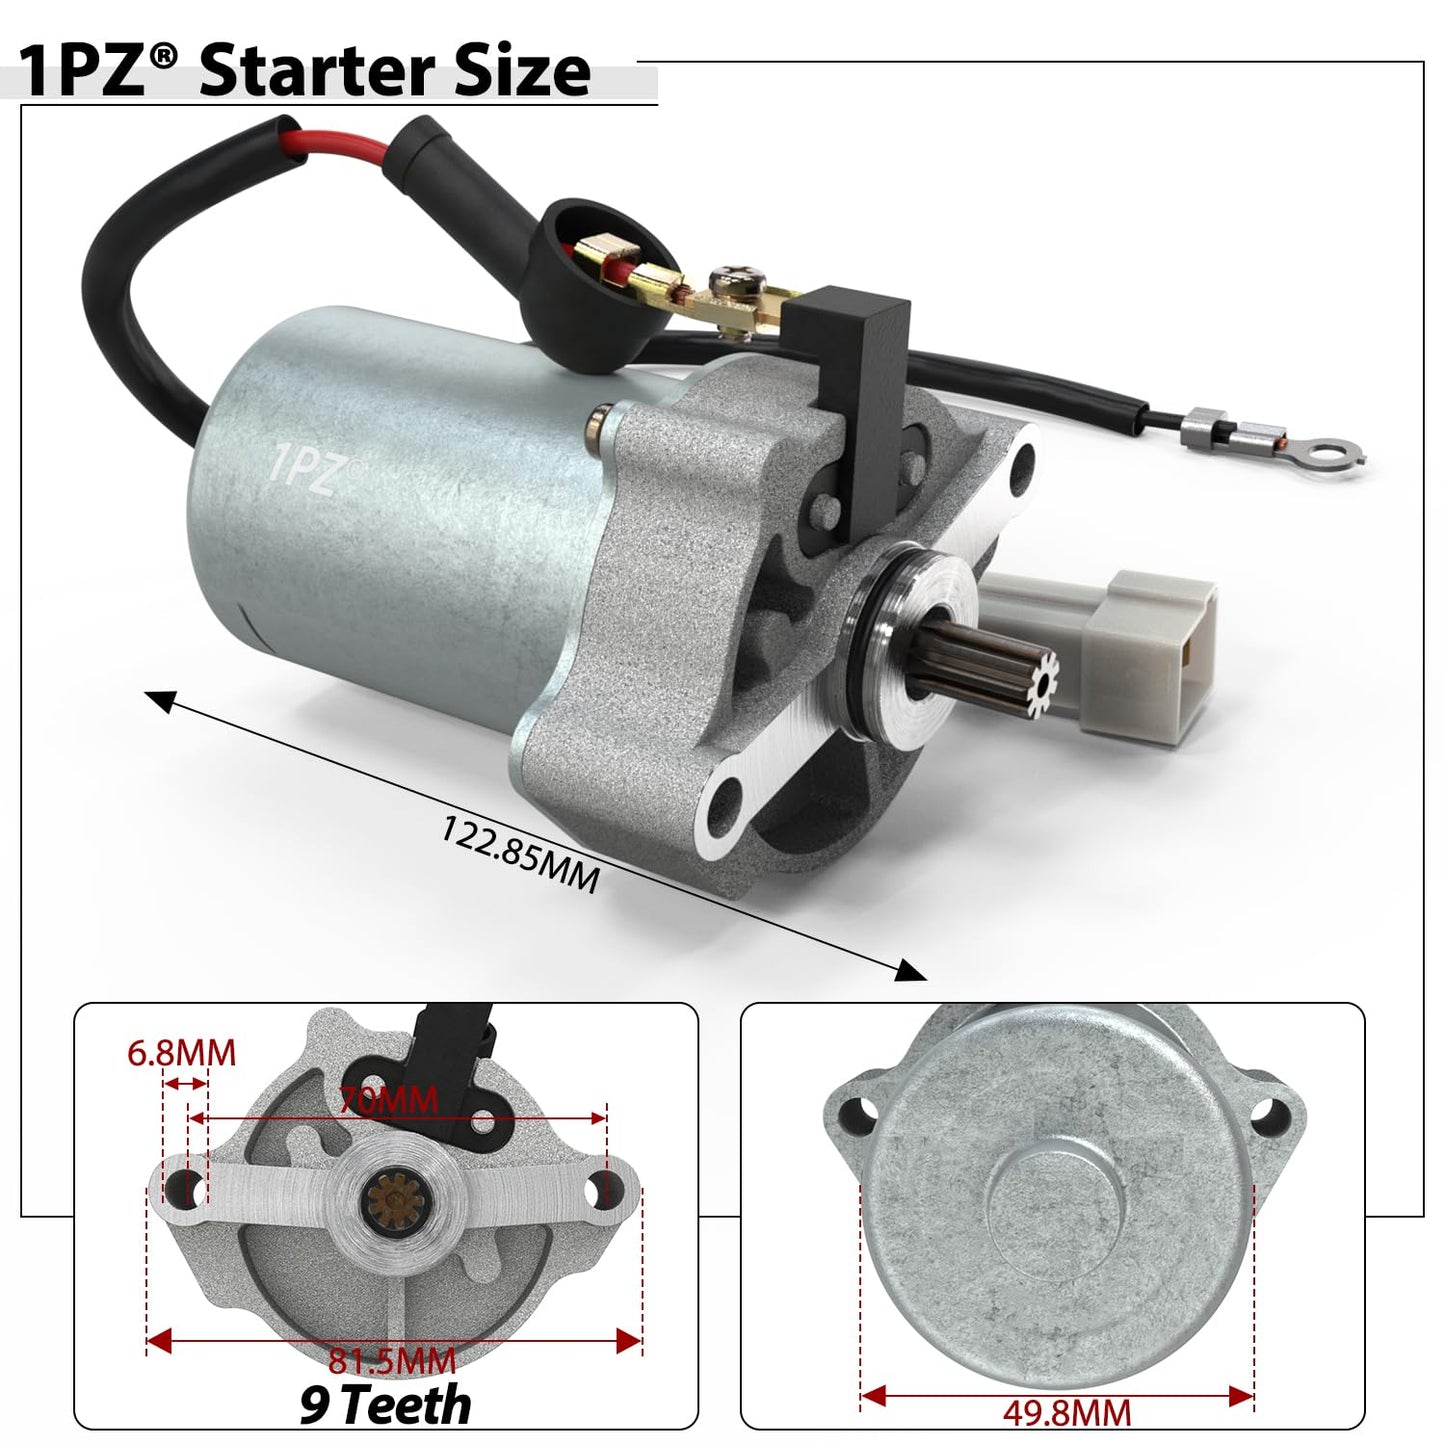 1PZ OW1-SE9 Starter Motor Replacement for Polaris Outlaw Sportsman 90 110 2007-2019 0453478 0454952